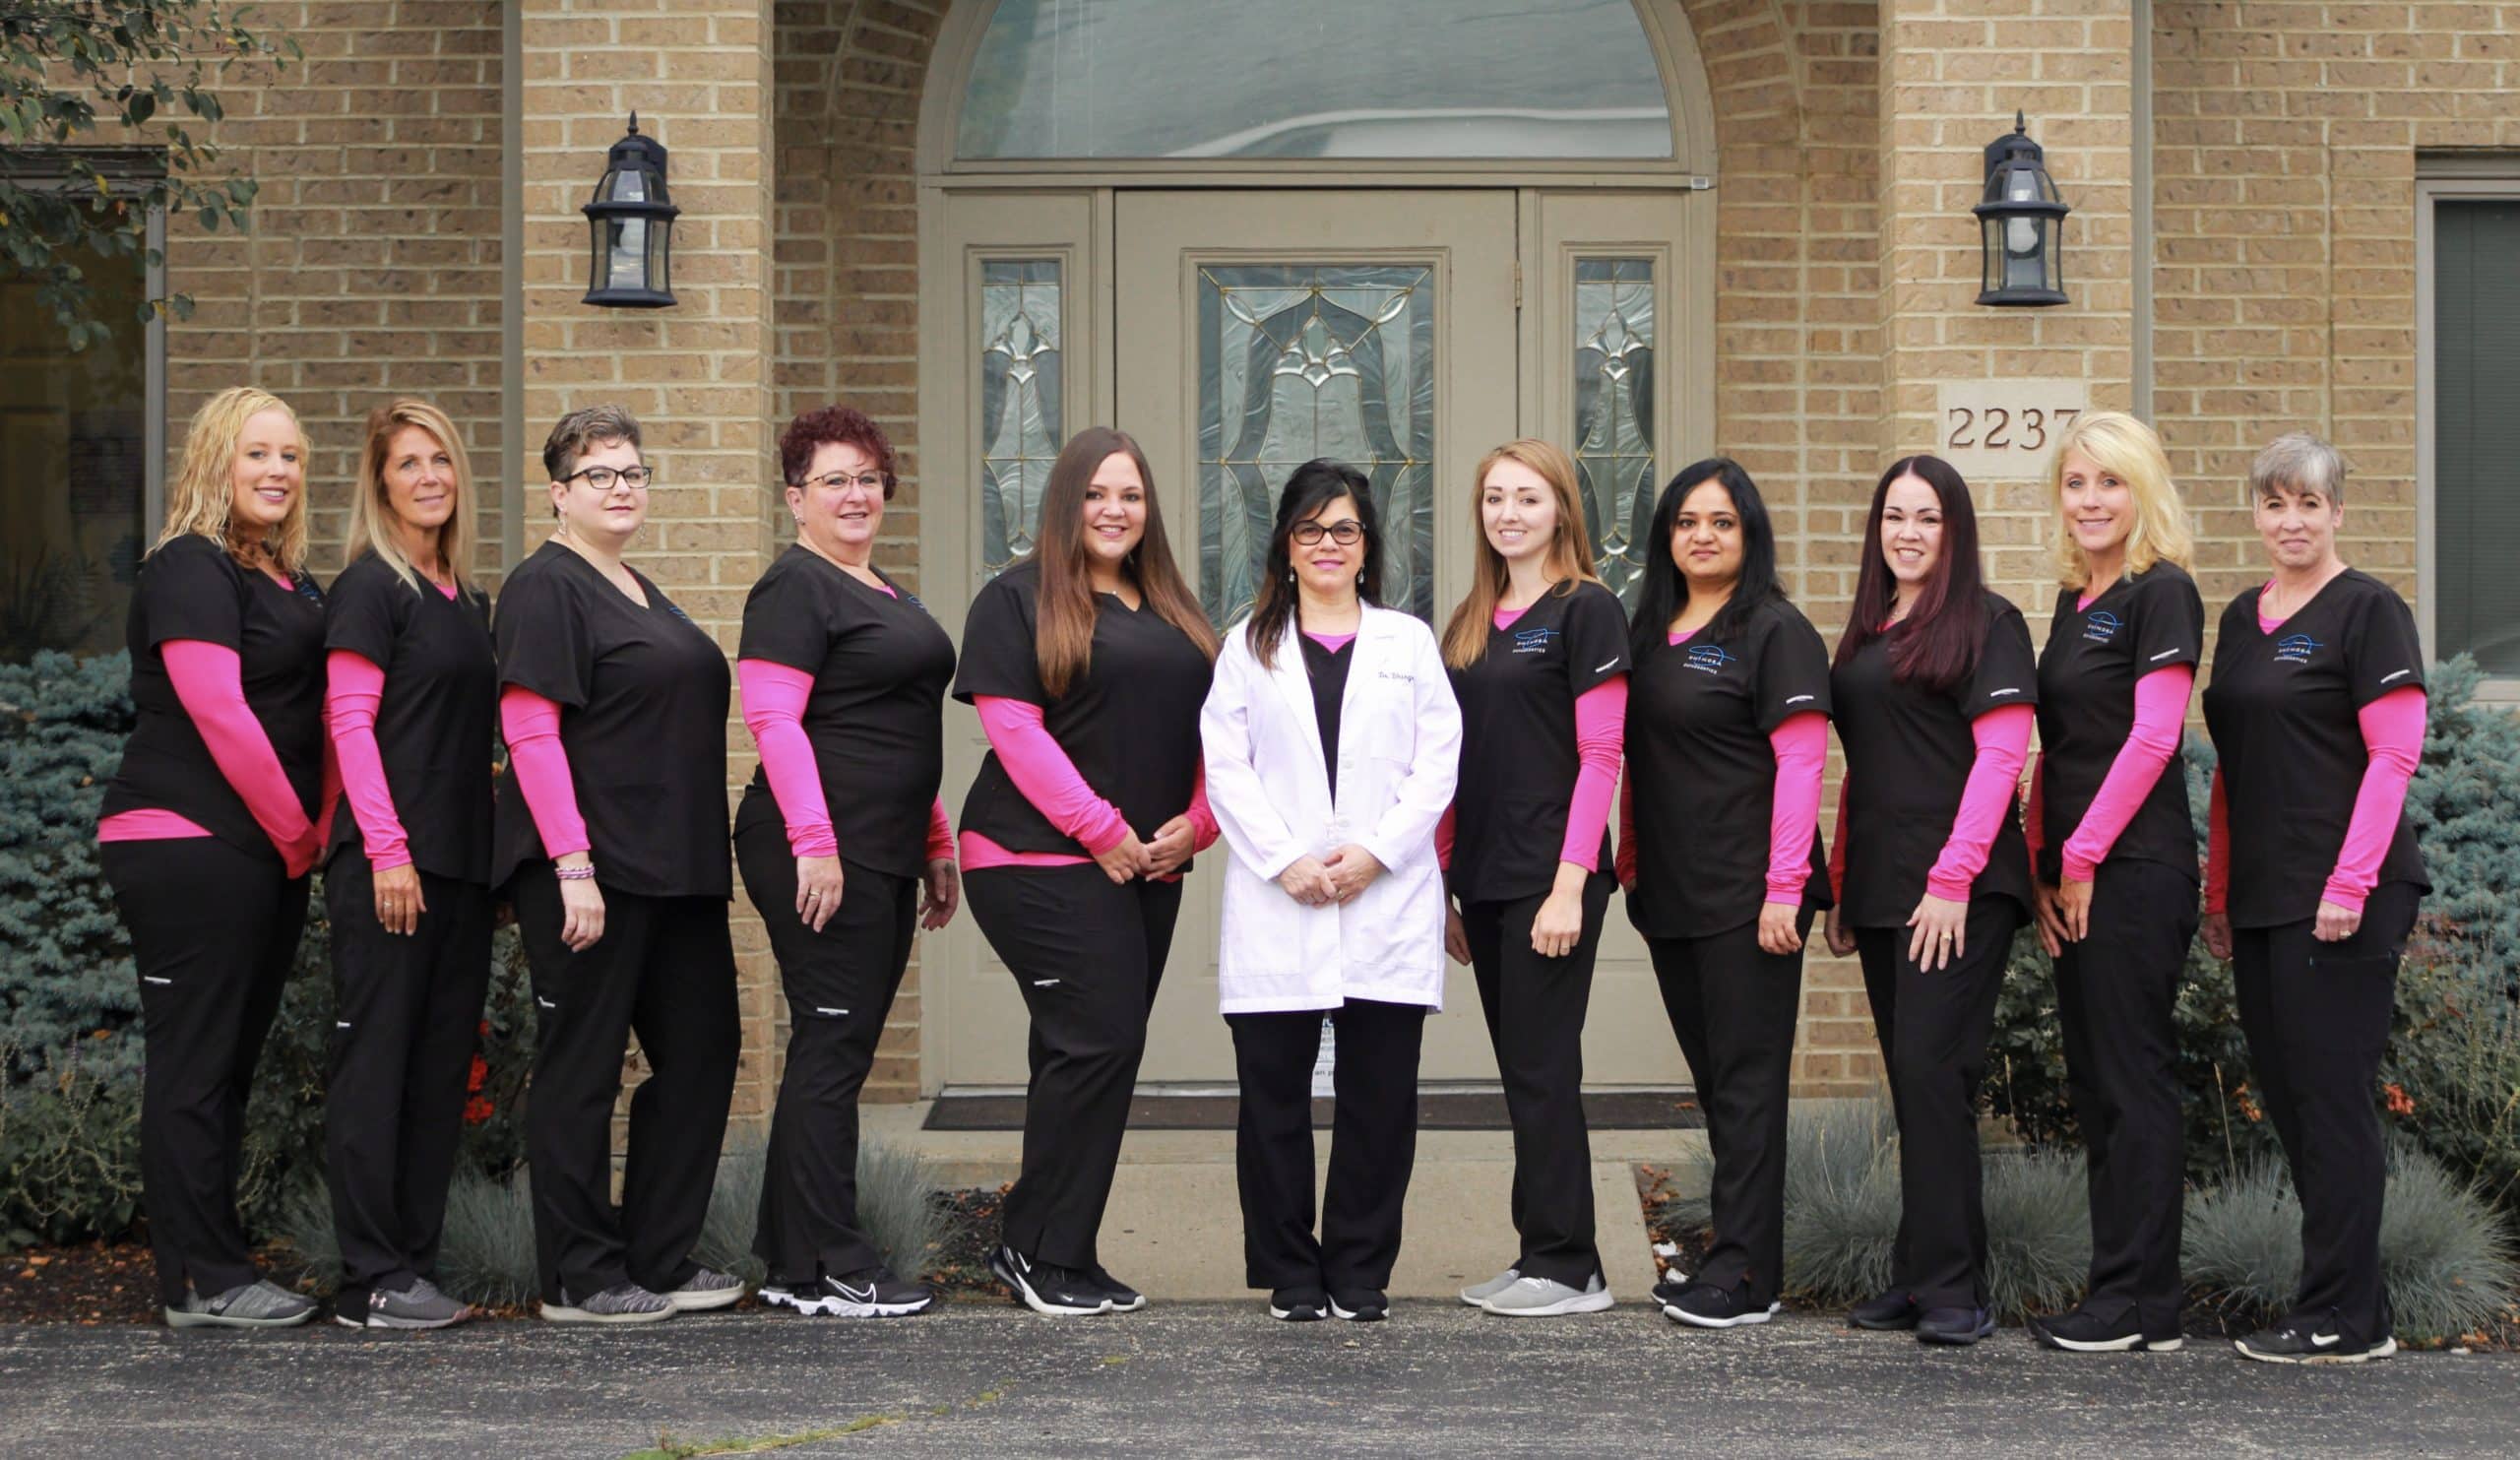 a group picture of all of the team at Dhingra orthodontics